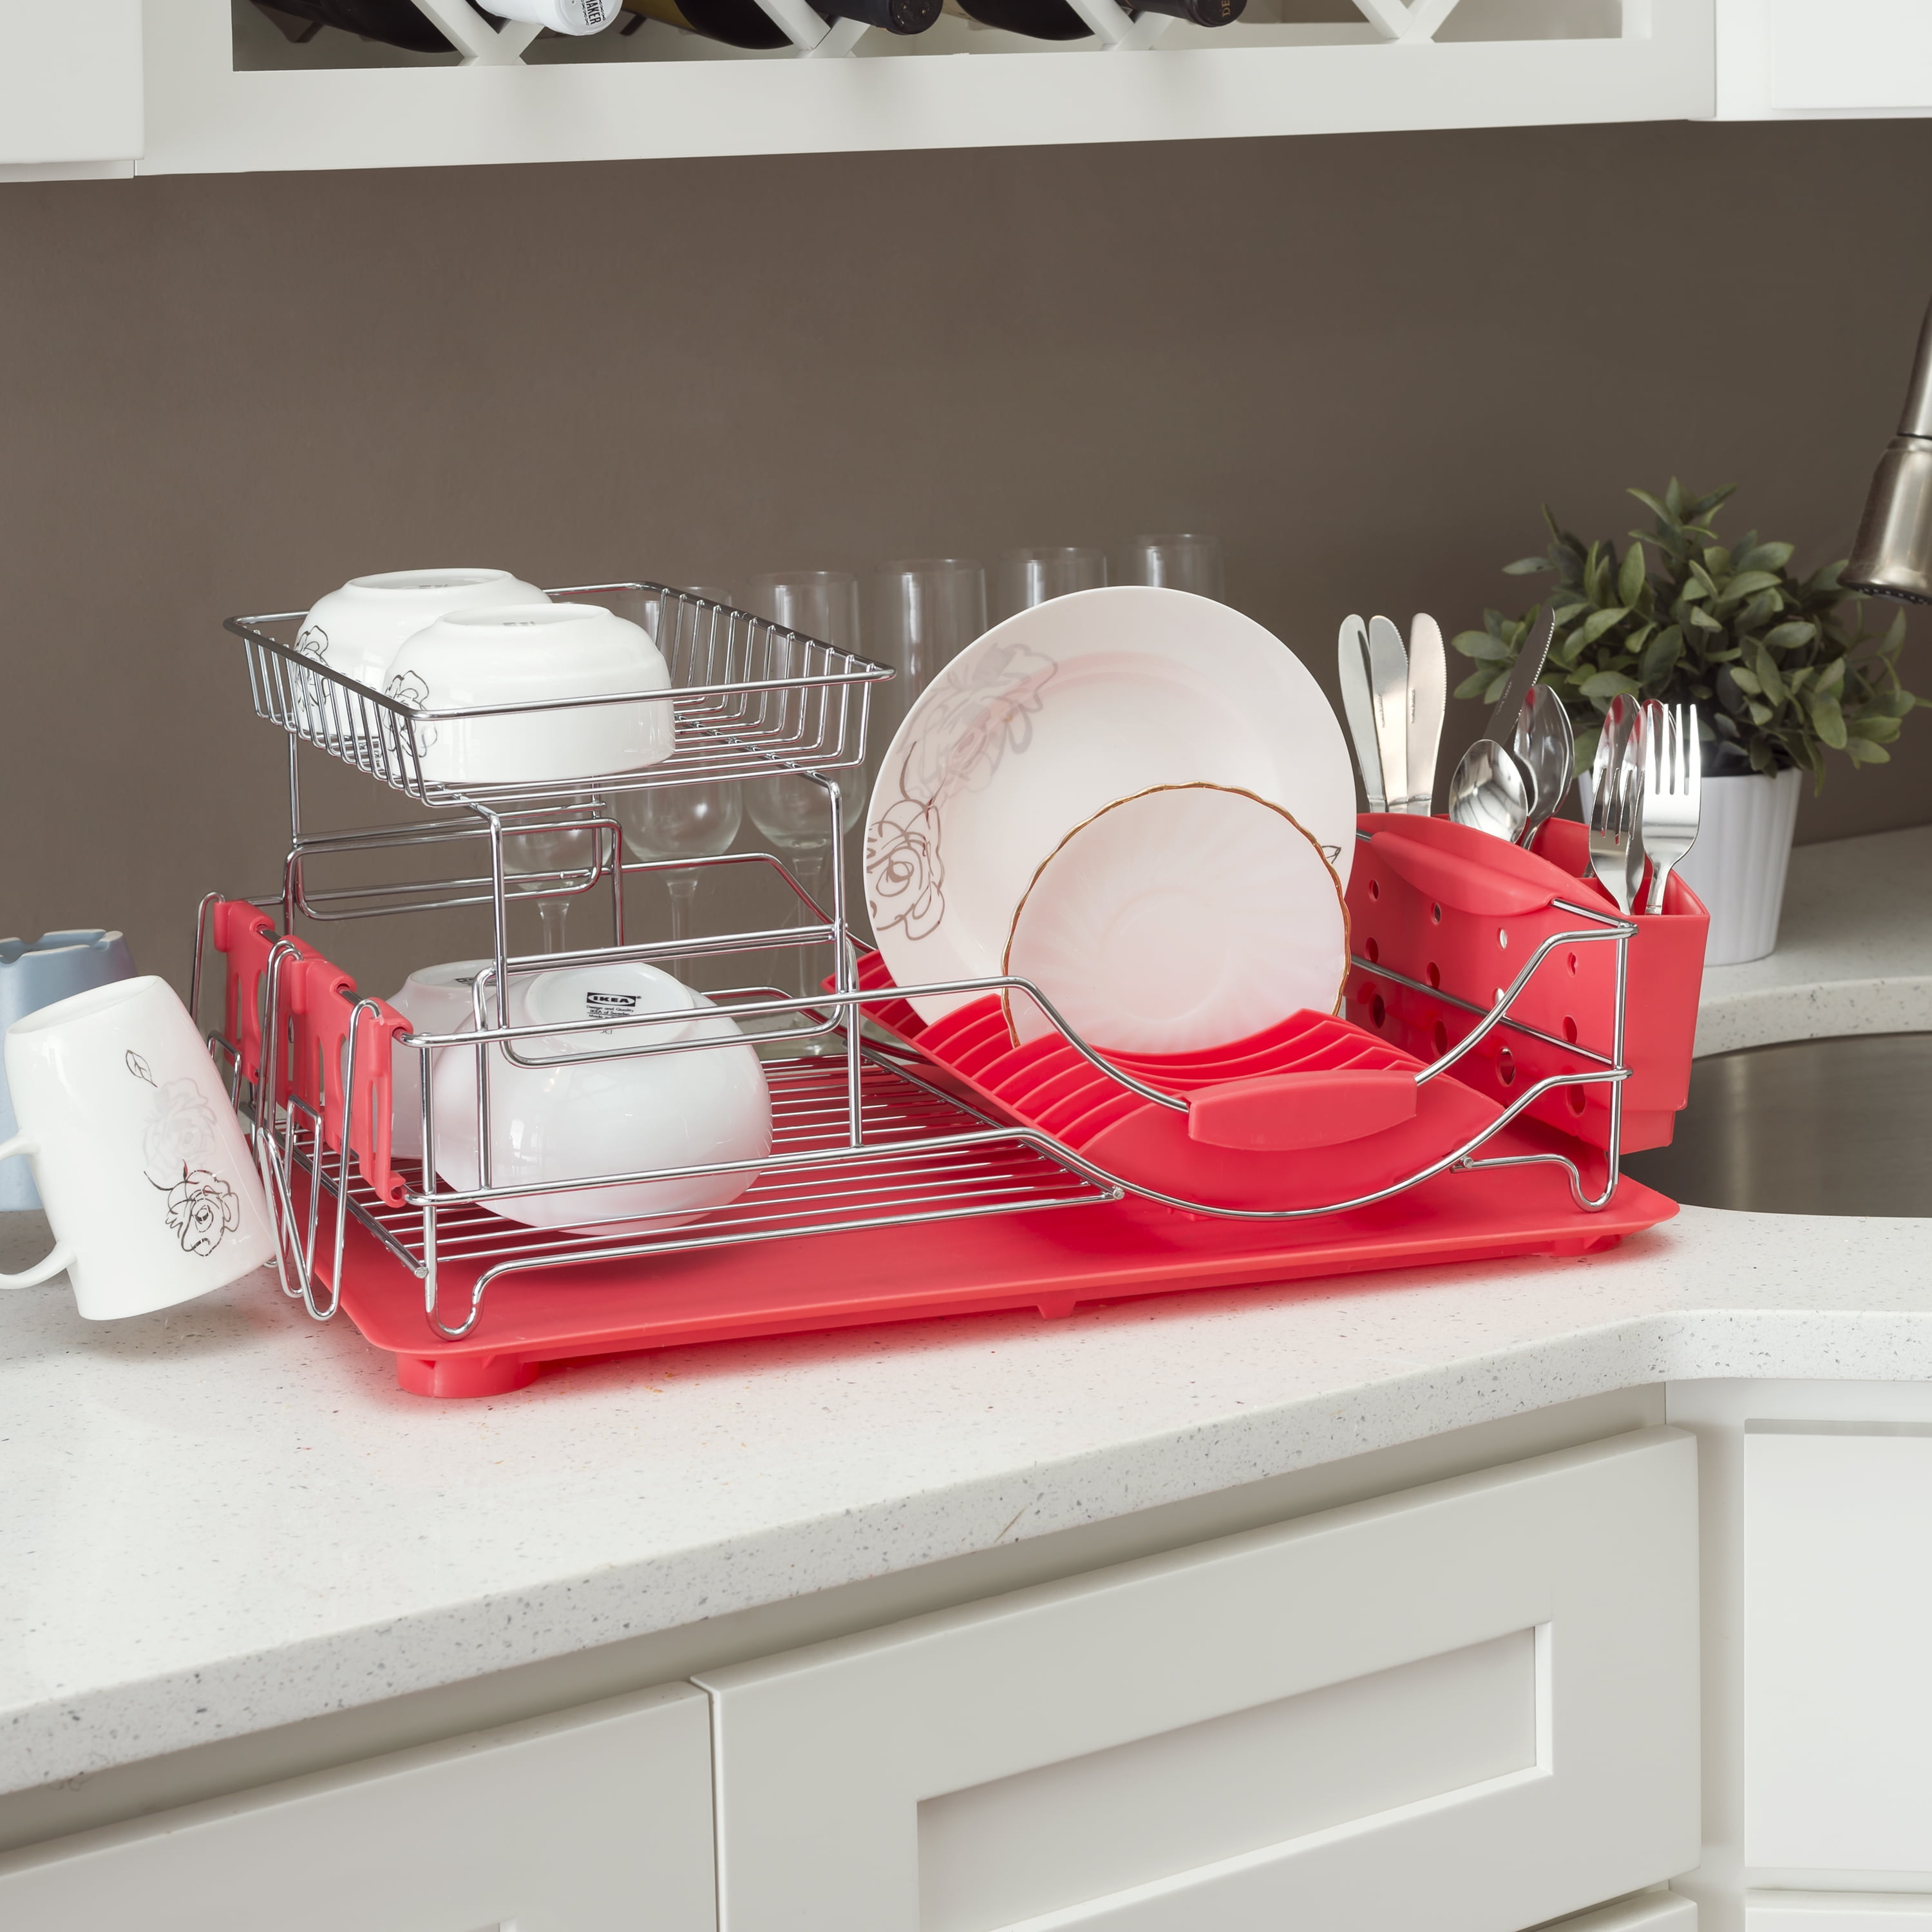 Dish Drying Rack (Red) | By Home Basics | Dish Drainers For Kitchen Counter  | With Sloping Tray and Utensil Holder | Big Dish Drying Rack